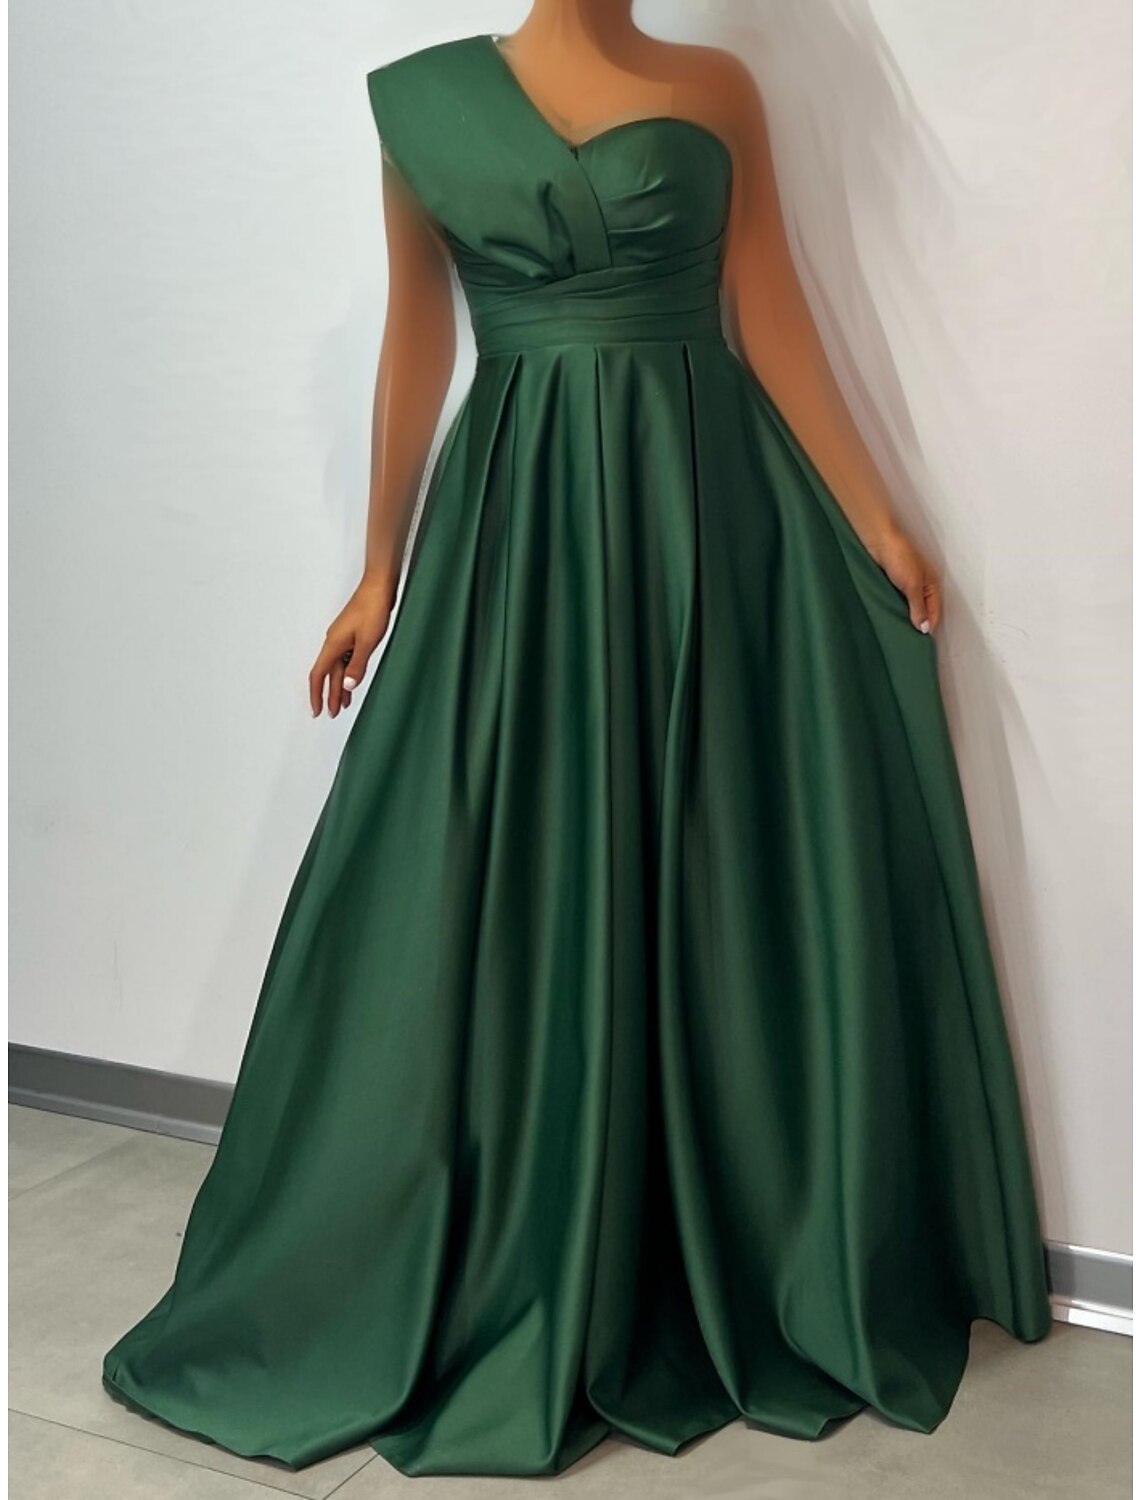 A-Line Evening Gown Elegant Dress Formal Floor Length Sleeveless One Shoulder Satin with Pleats Ruched